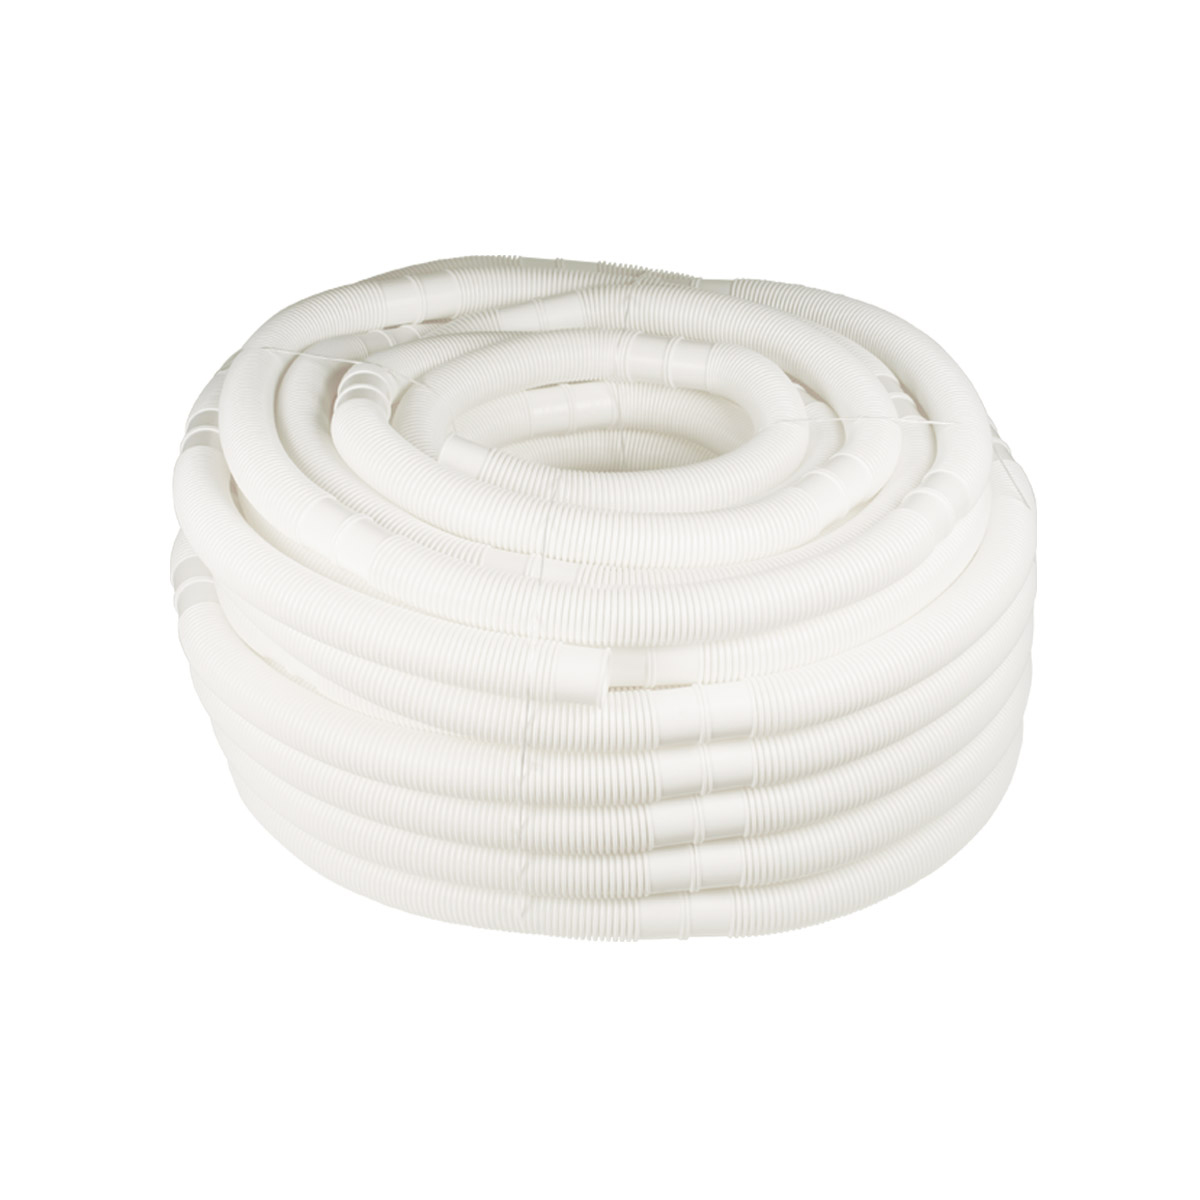 Swimming pool hose with 2 fixed sockets d=38mm white  l=9m, packed in white box Swimming pool hose with 2 fixed sockets d=38mm white  l=9m, packed in white box